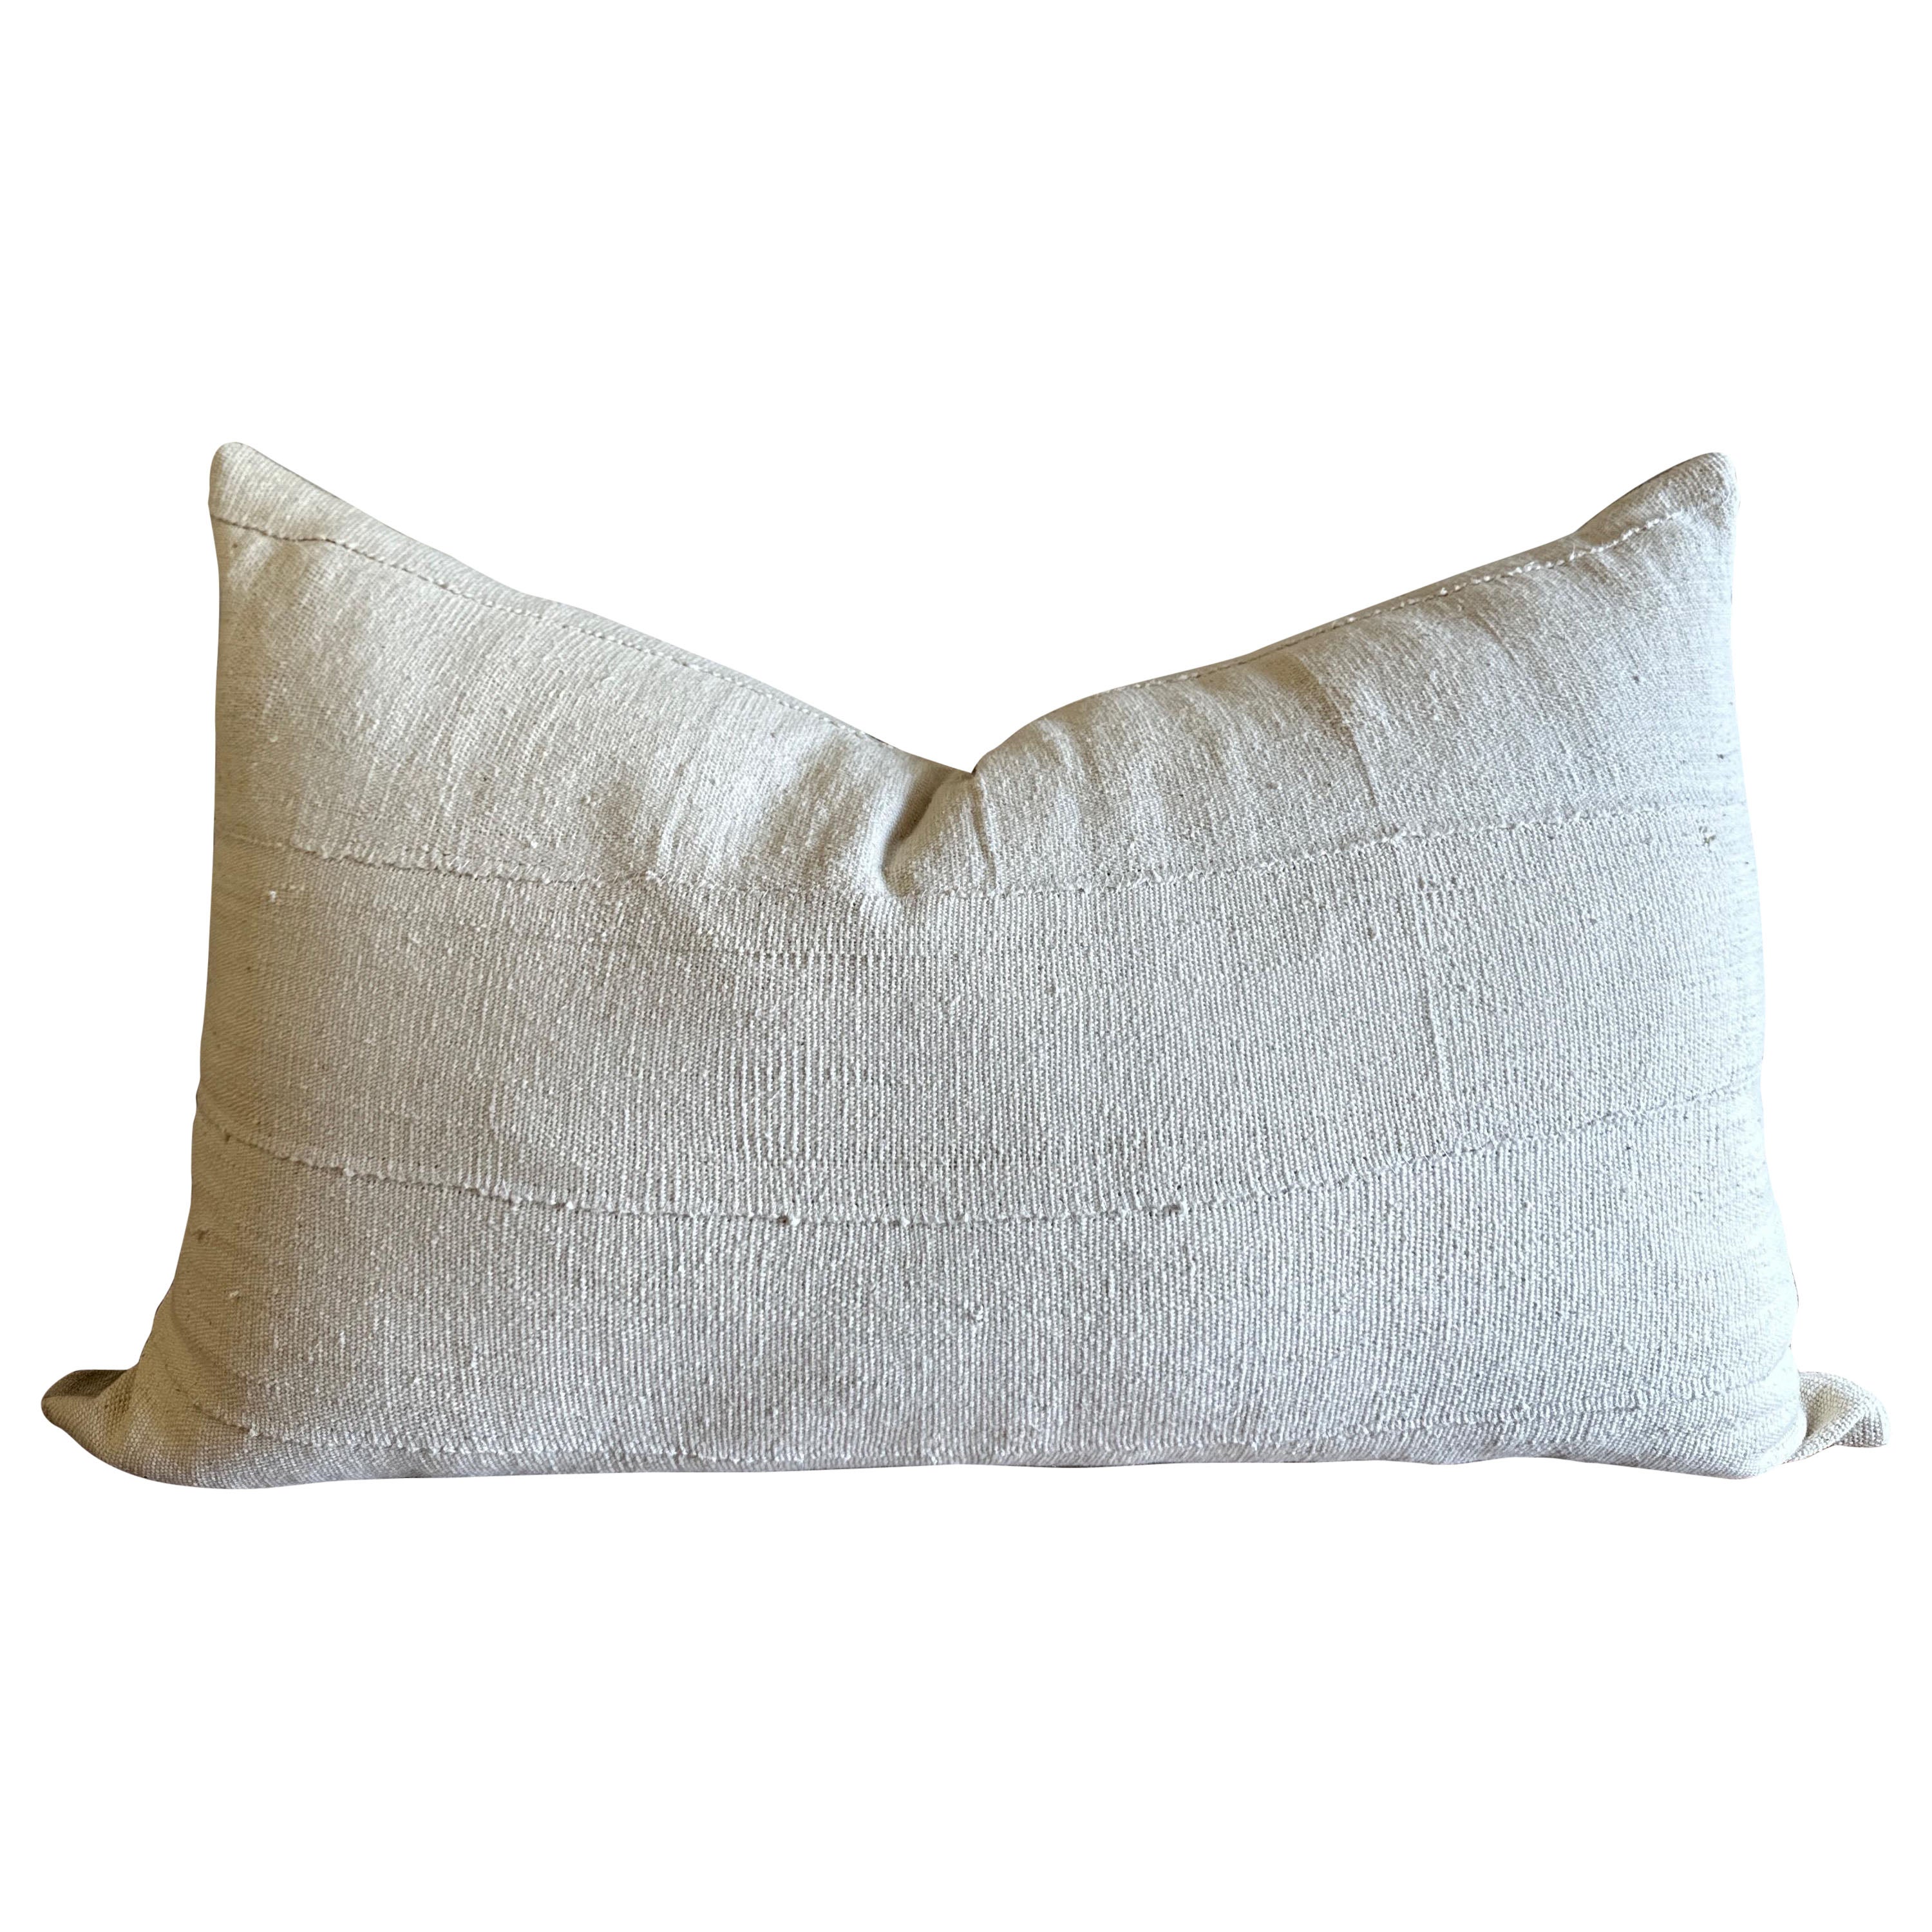 Vintage White French Linen Accent Large Lumbar Pillow with Insert